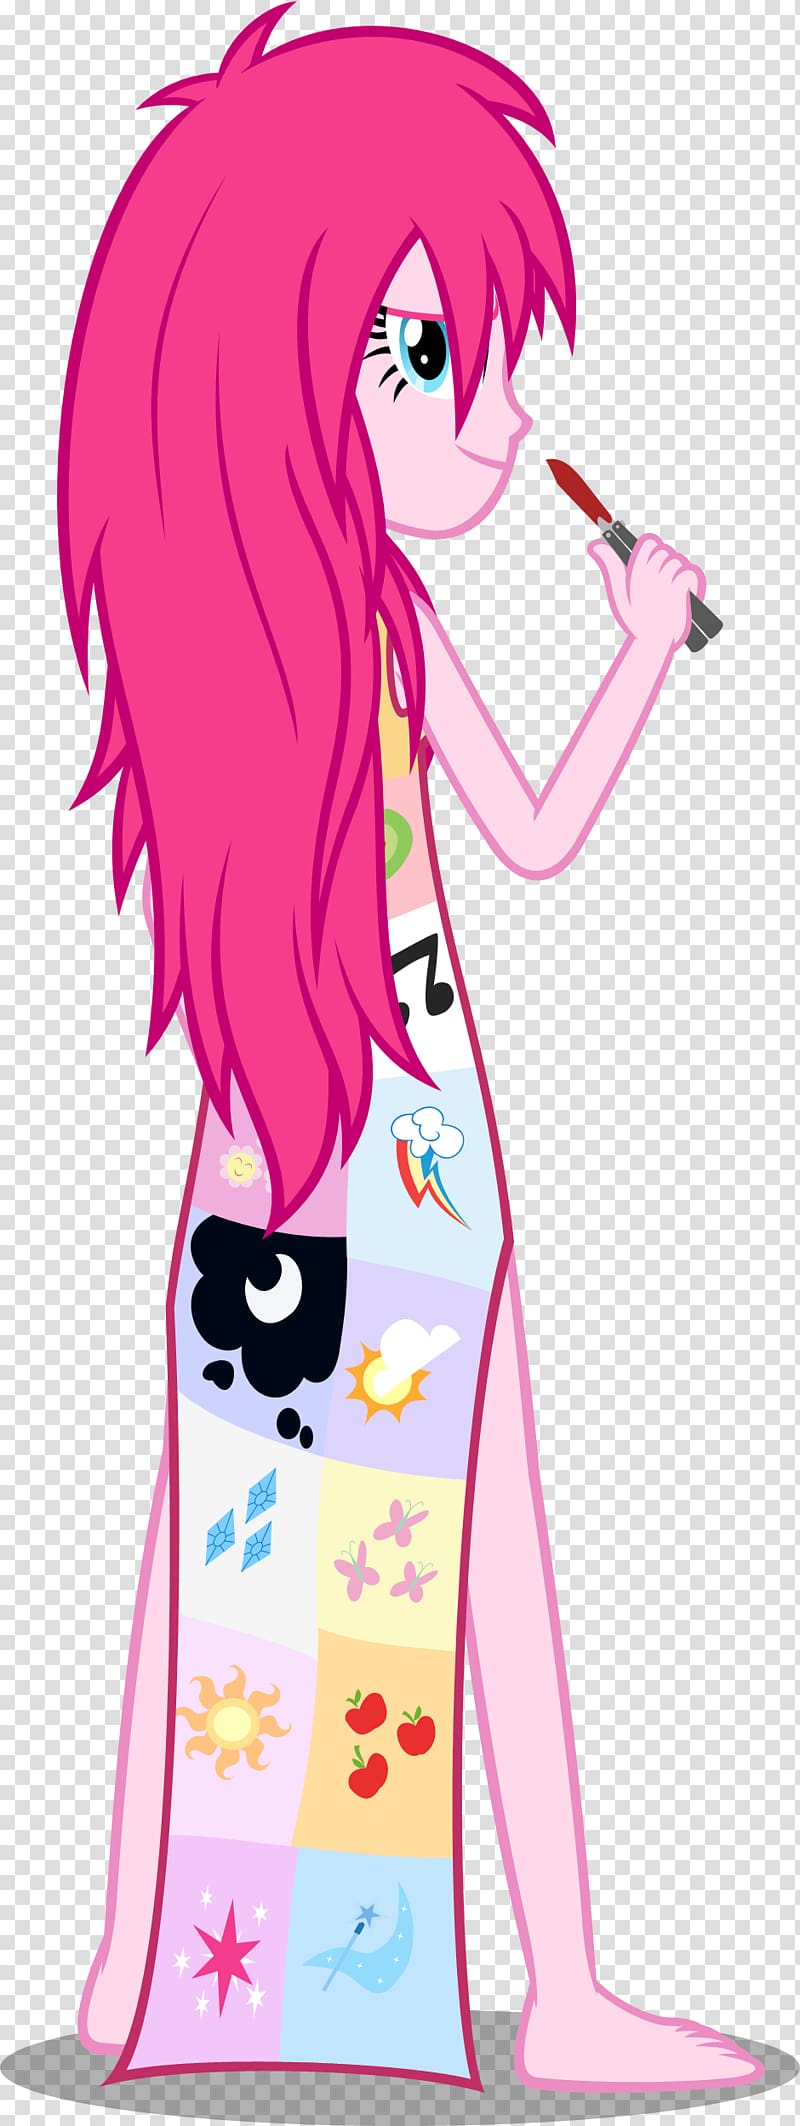 Pinkie Pie Twilight Sparkle My Little Pony: Equestria Girls Rarity, bloody knife transparent background PNG clipart